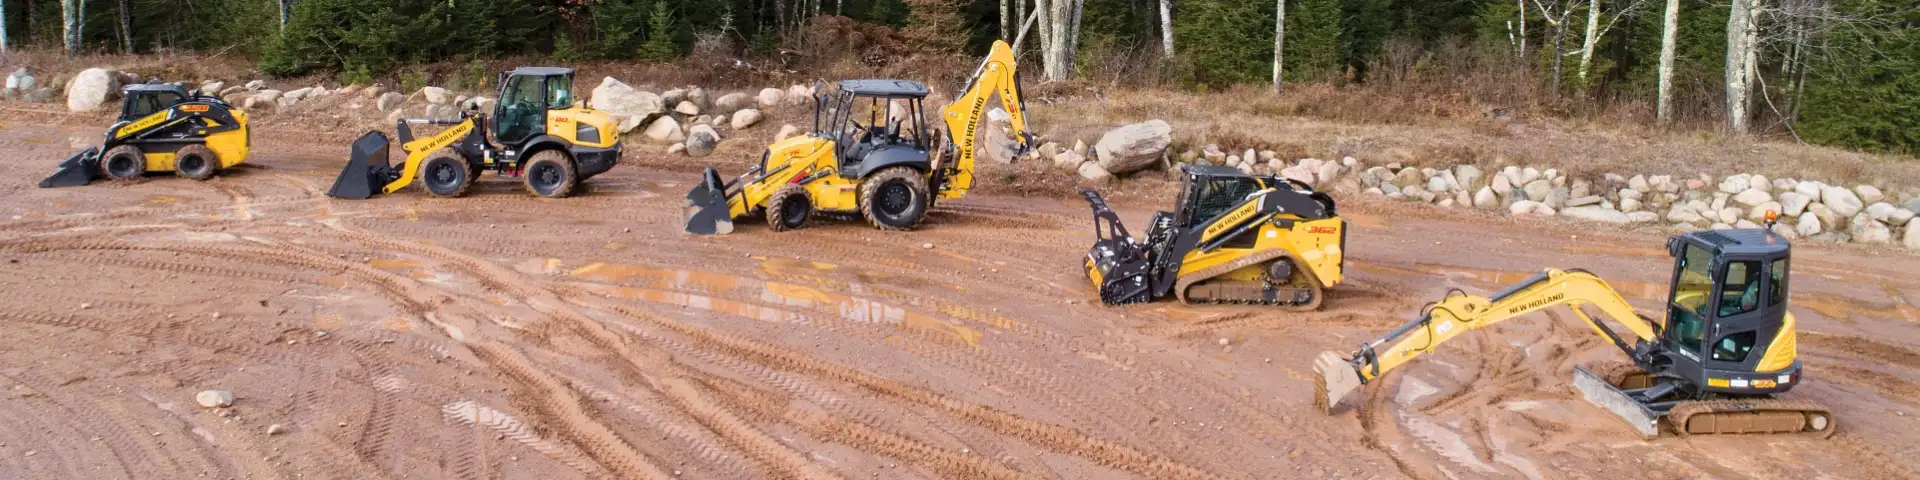 New Holland construction equipment lined up on a jobsite